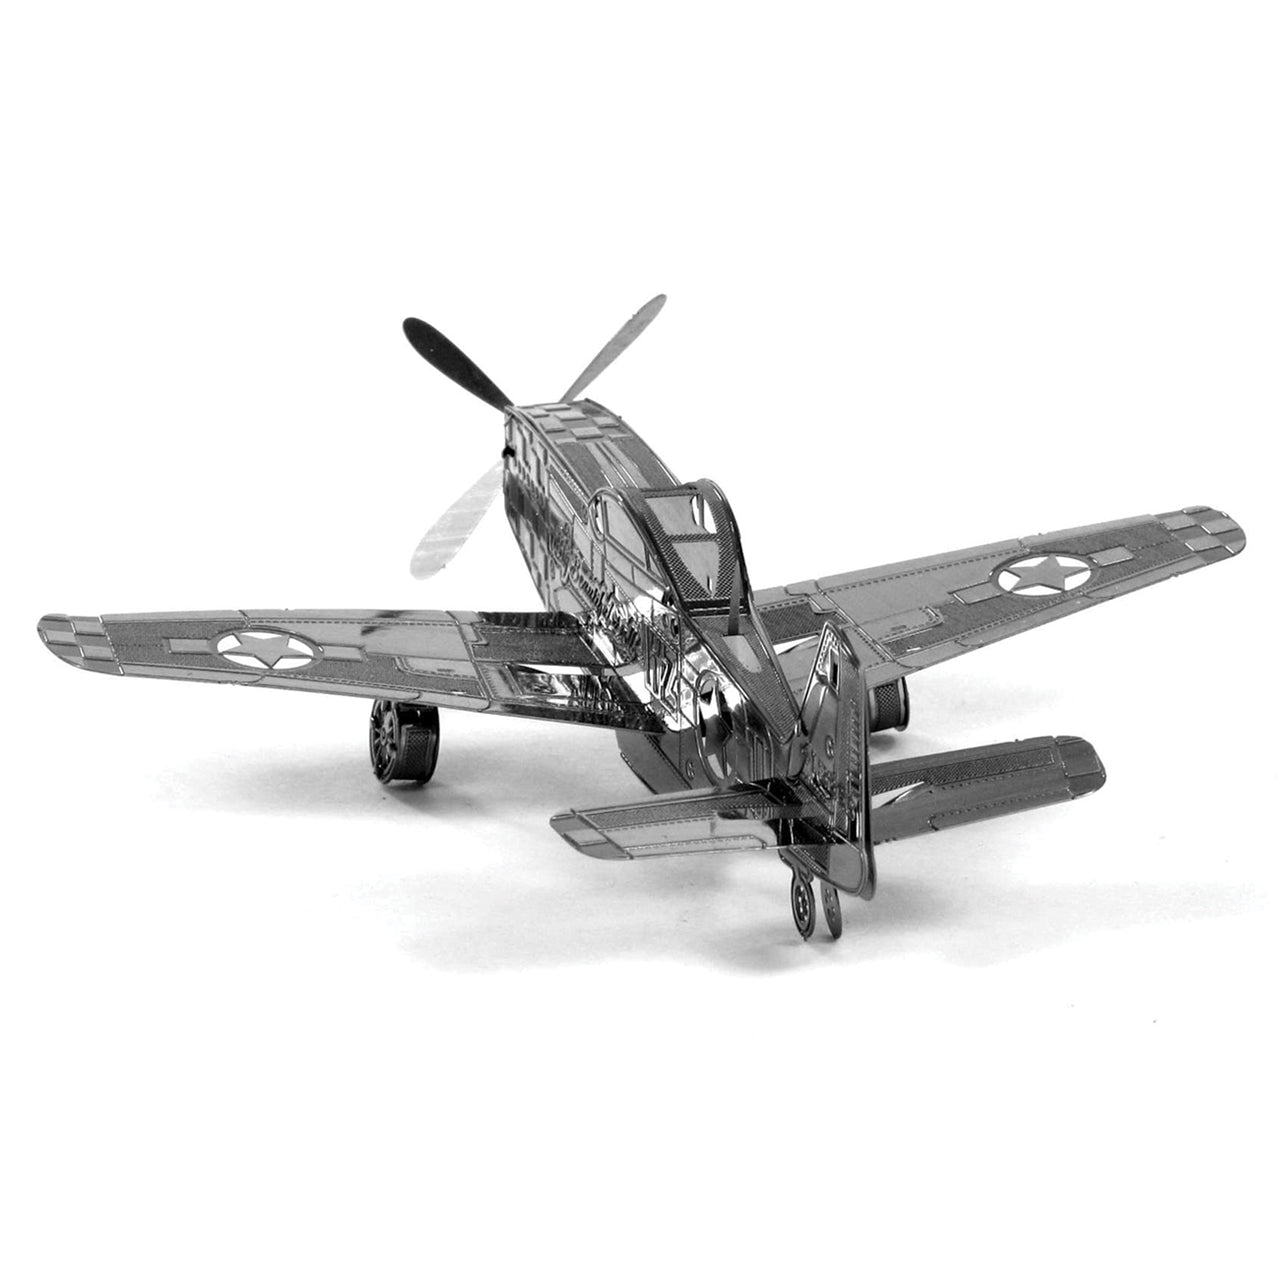 FMW003 P-51 Mustang Airplane (Buildable) 